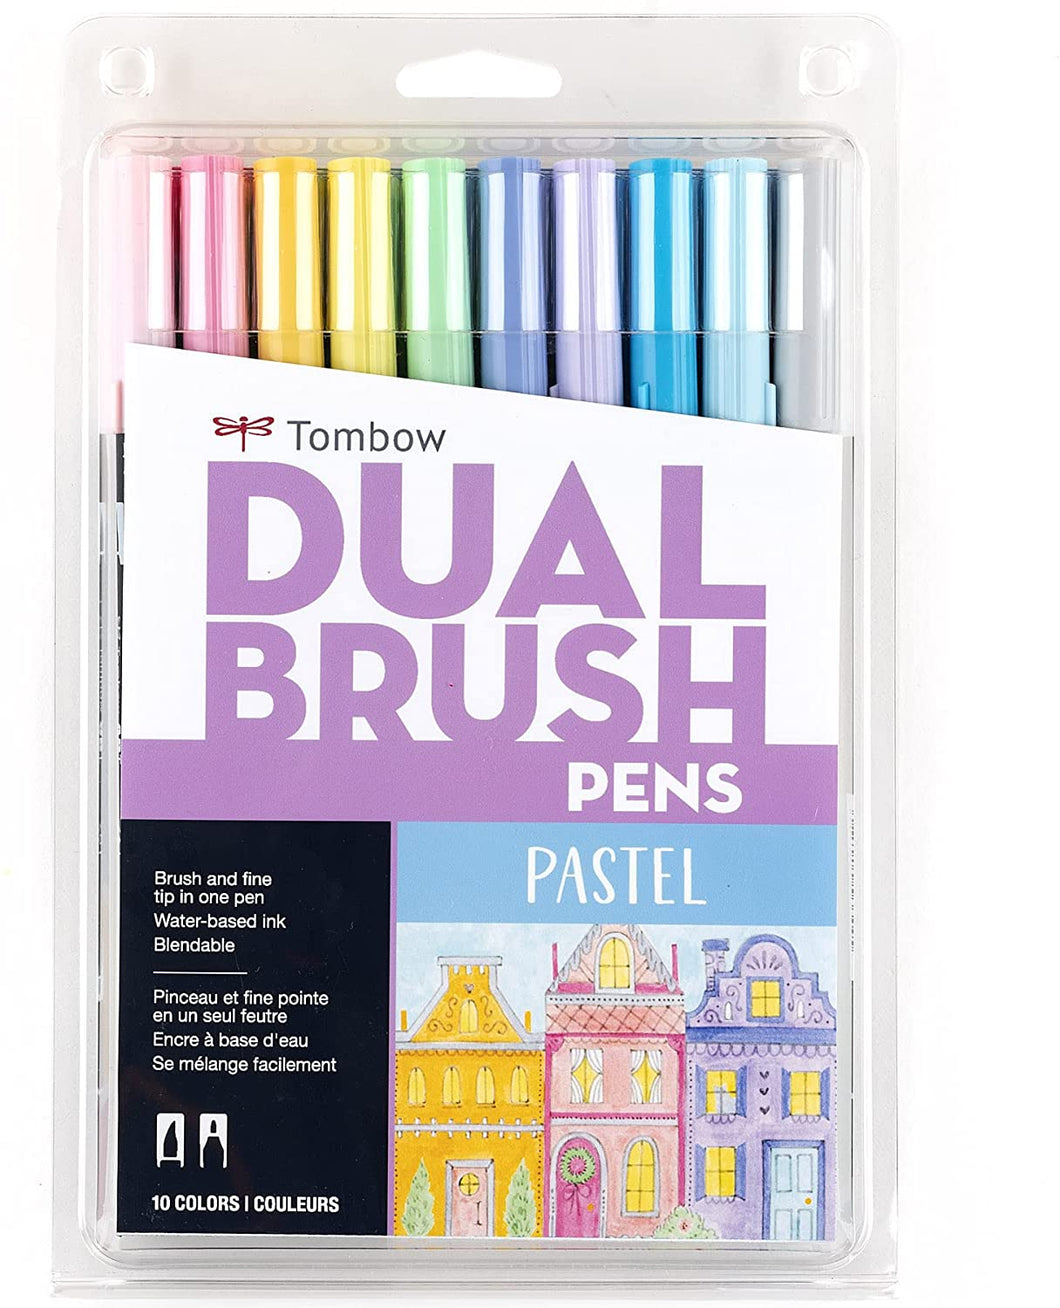 Tombow Dual Brush Pens - 10 Pack Pastel Shades